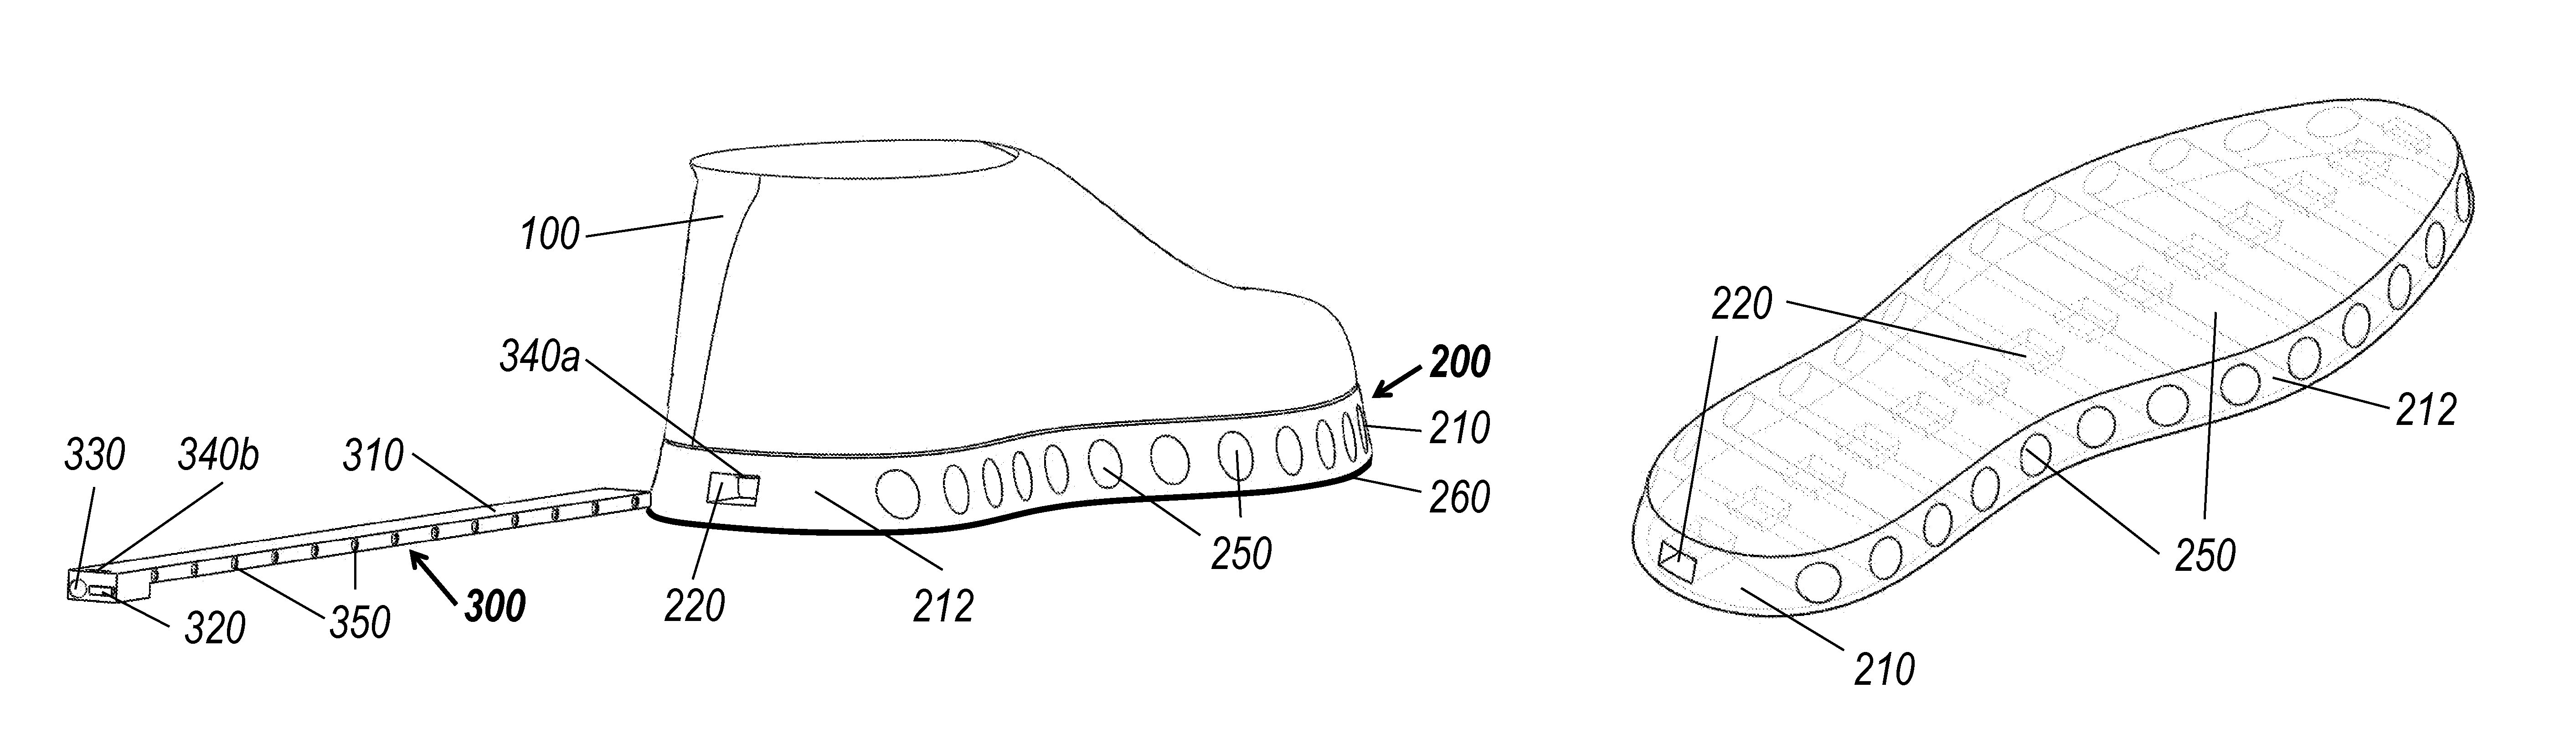 Footwear with insertable lighting assembly